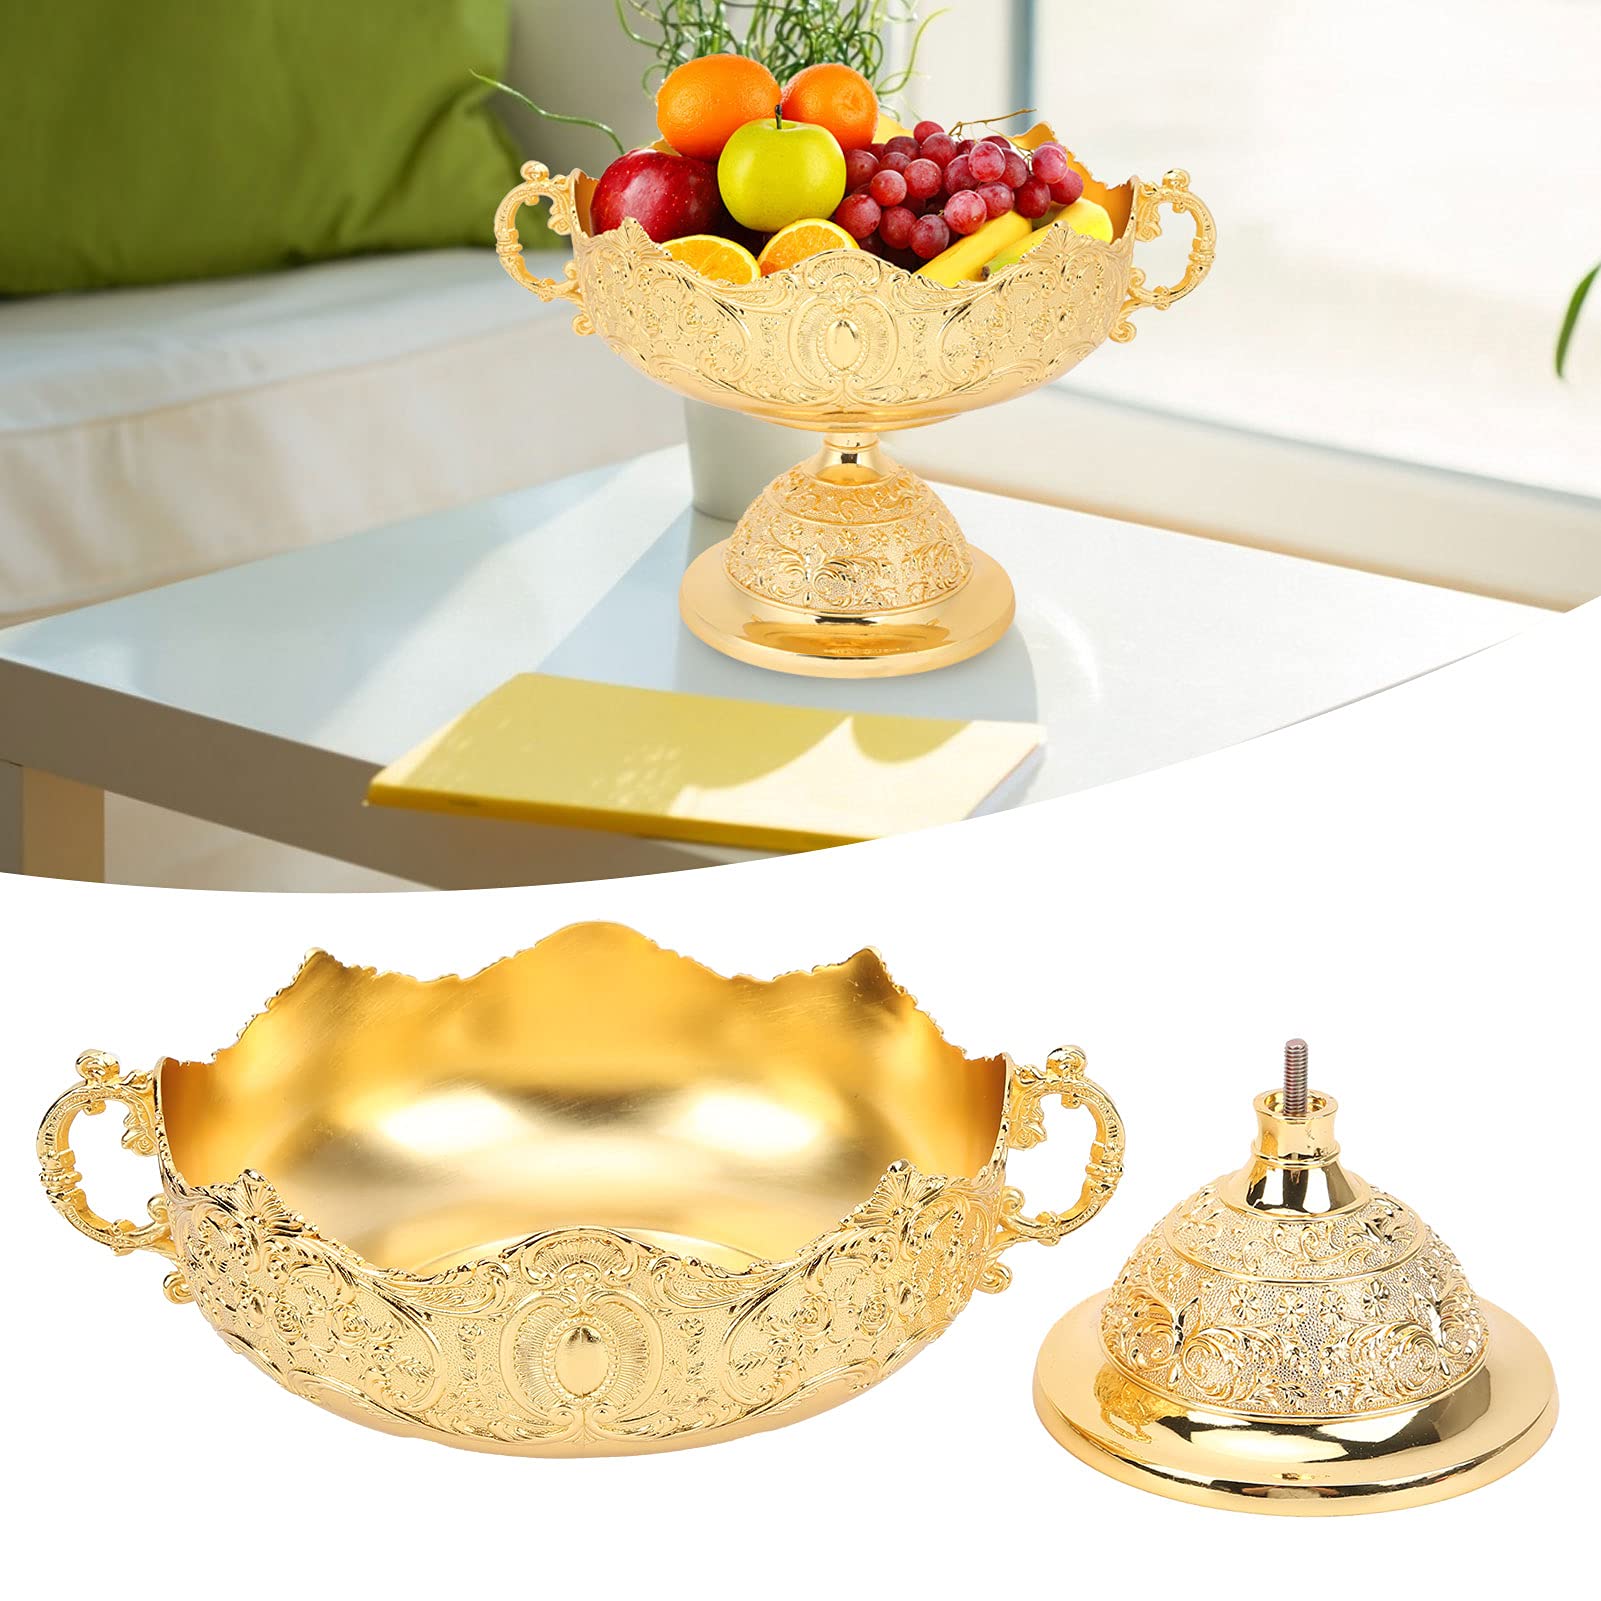 yaogohua Golden Fruit Plate European Fruit Plate Tray Trinket Dish Snack Tray European Style Fruits Basket Ornaments Food Serving Tray for Desktop Decoration